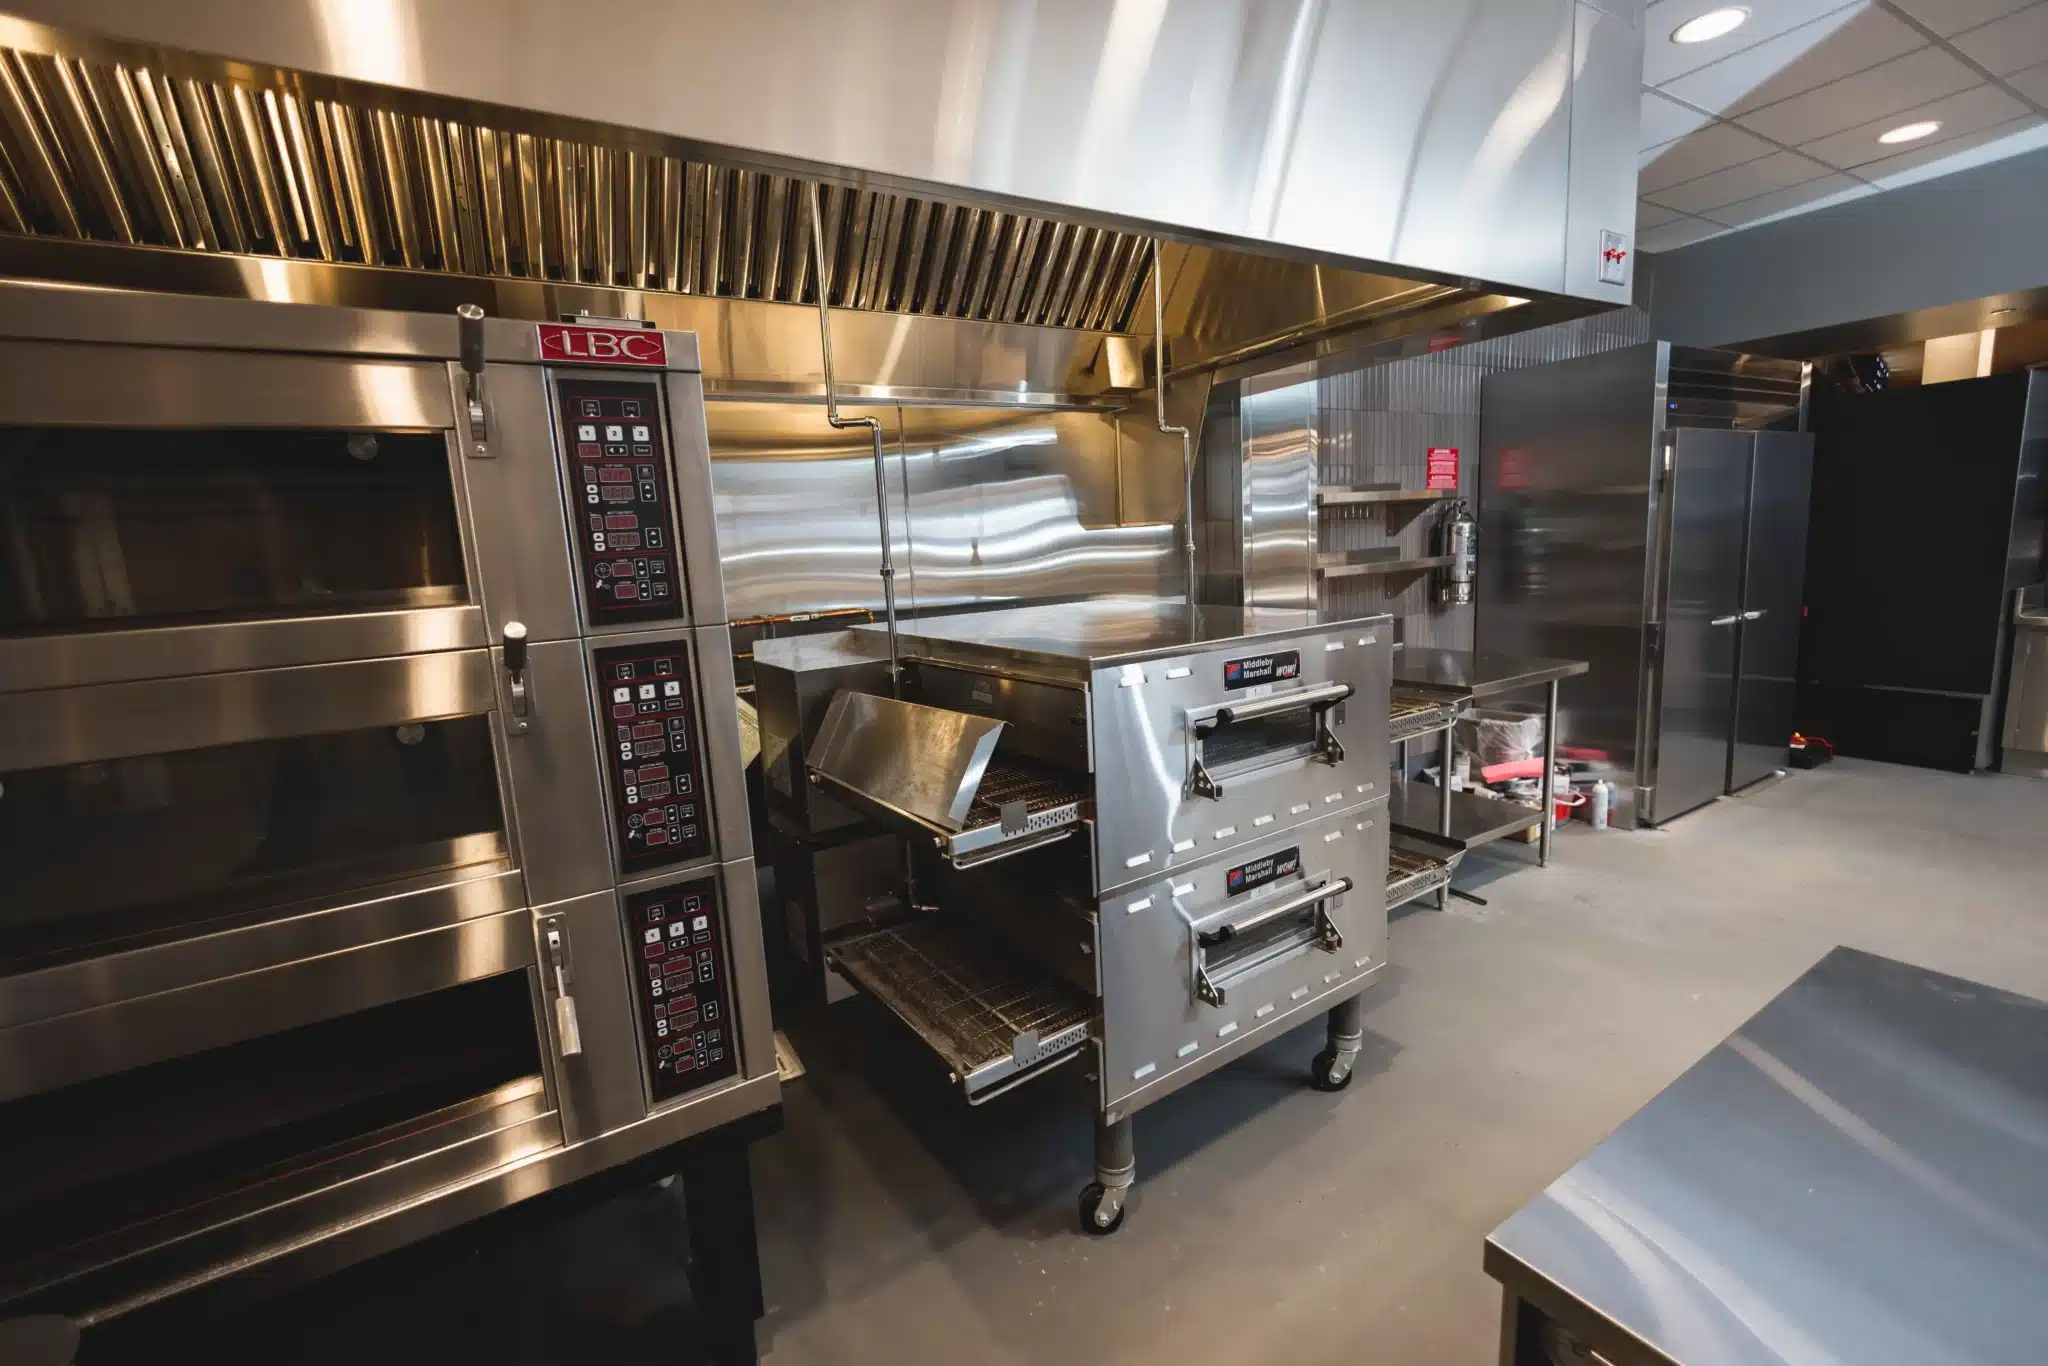 How to Plan Your Commercial Prep Kitchen Layout - IMG 2264 scaled - Eleven36 Blog